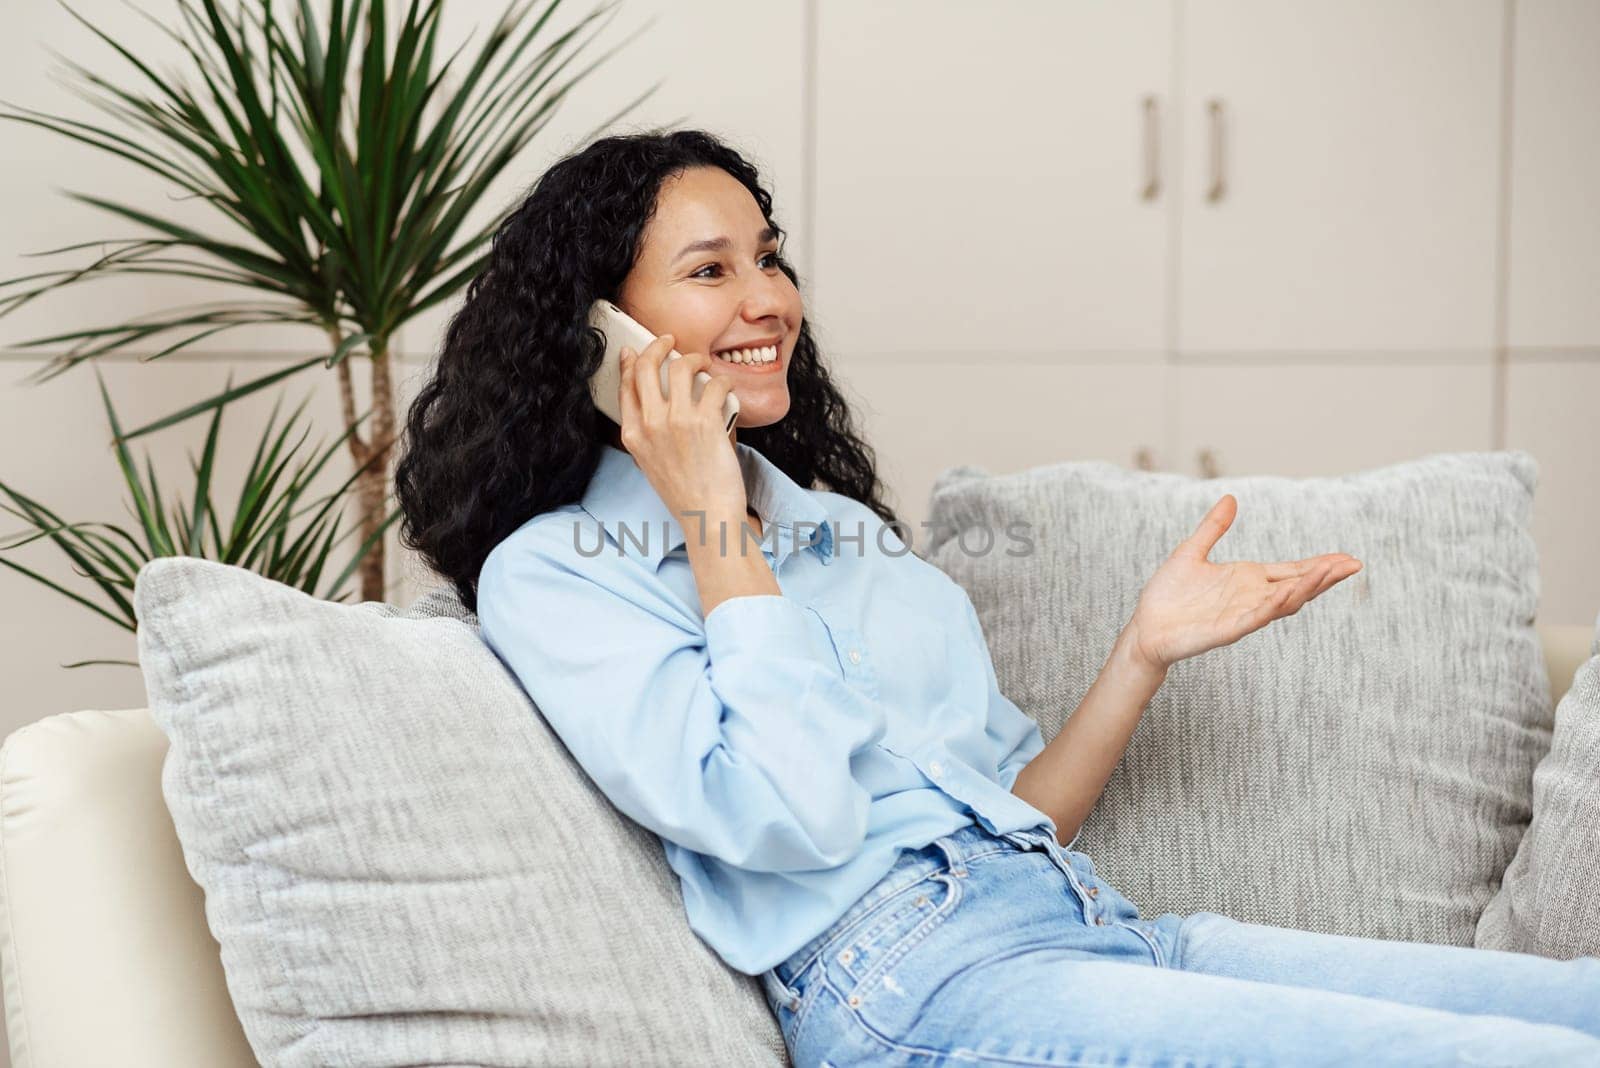 Beautiful young woman of Arab appearance and talking on the phone Sitting on the sofa smiling . The girl has a pleasant conversation and enjoys communication.